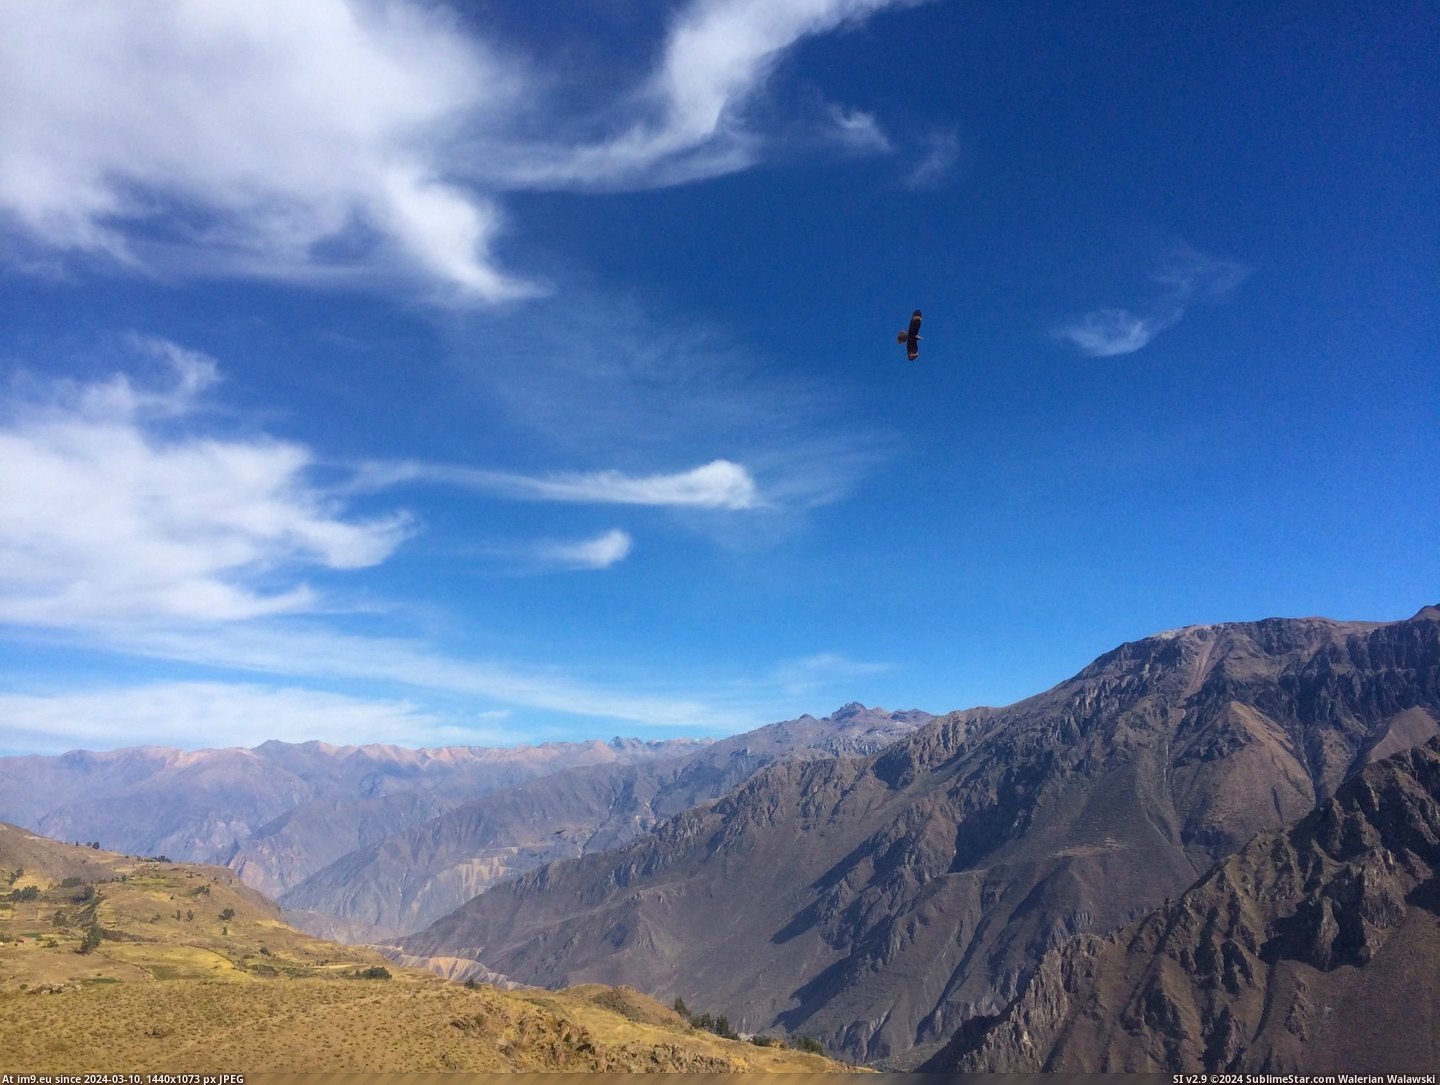 #One #World #Baby #Solo #Deepest #Canyons #Condor #Canyon #3264x2448 #Flying #Peru [Earthporn]  A baby andean condor flying solo above Colca Canyon, Peru (one of the deepest canyons in the world) [3264x2448] Pic. (Bild von album My r/EARTHPORN favs))